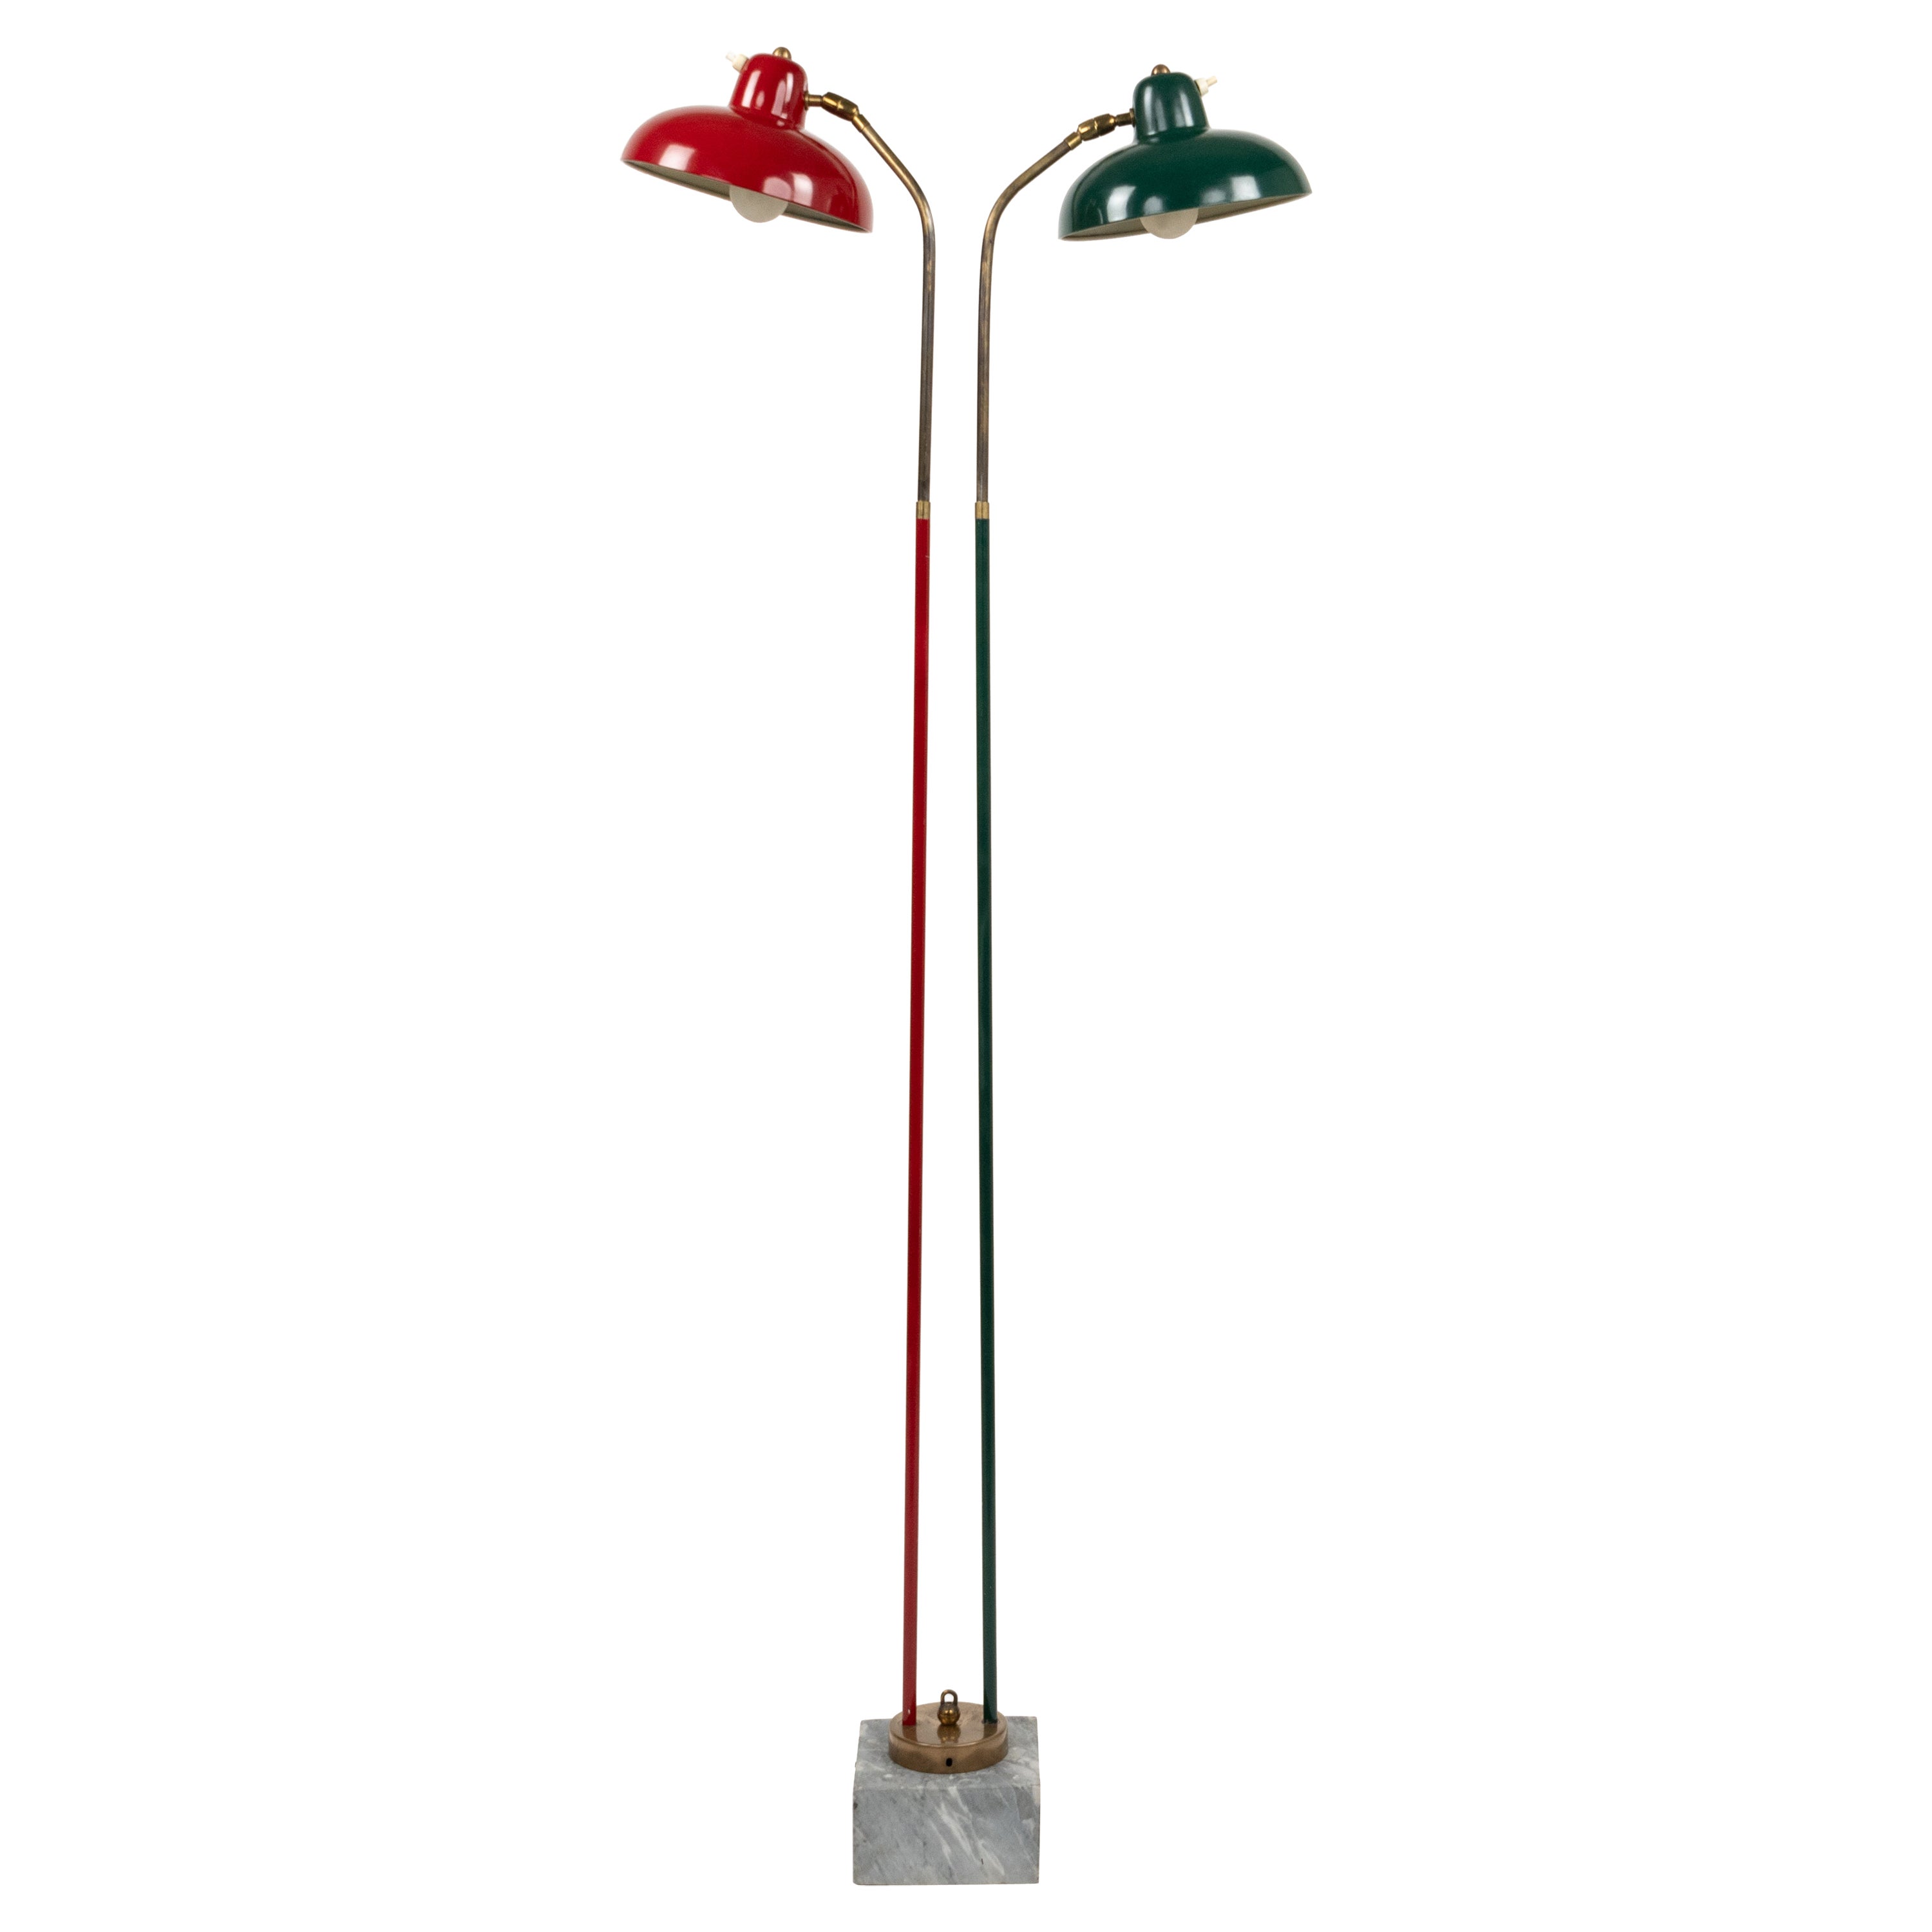 Floor Lamp in Marble, Lacquered Metal and Brass Stilnovo Style, Italy 1950s